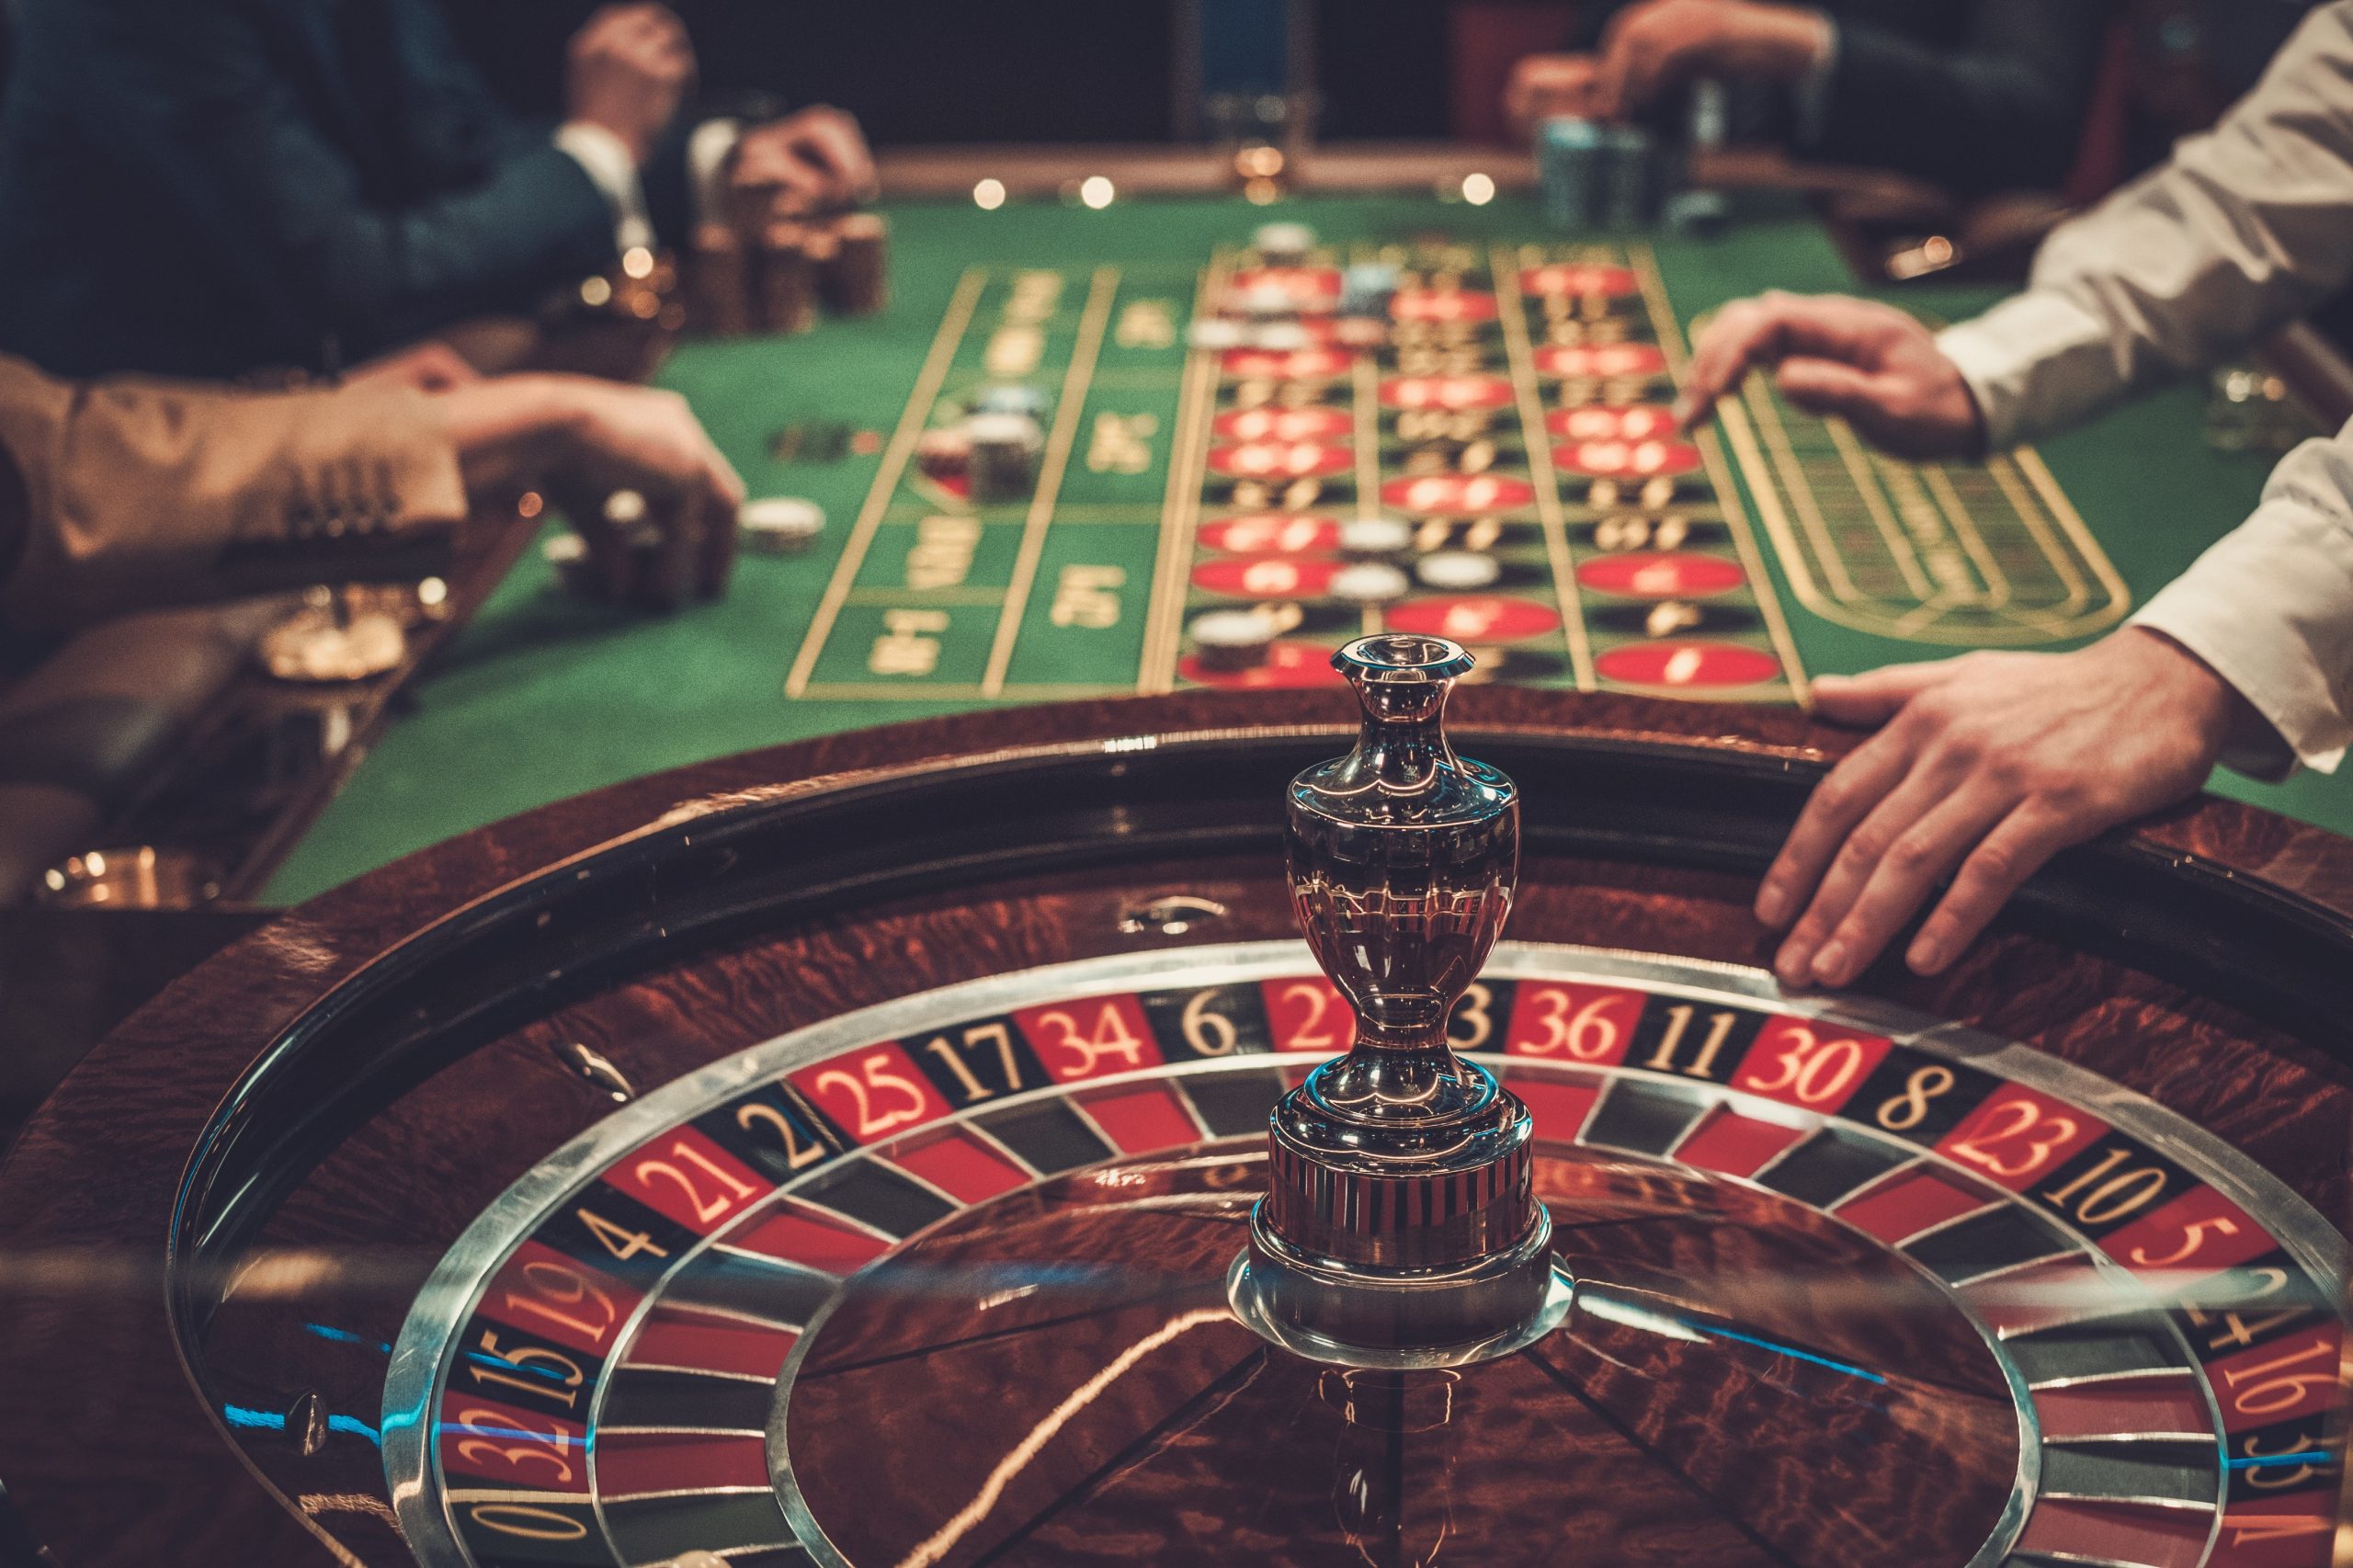 Gambling law changes could pave way for first NI casino